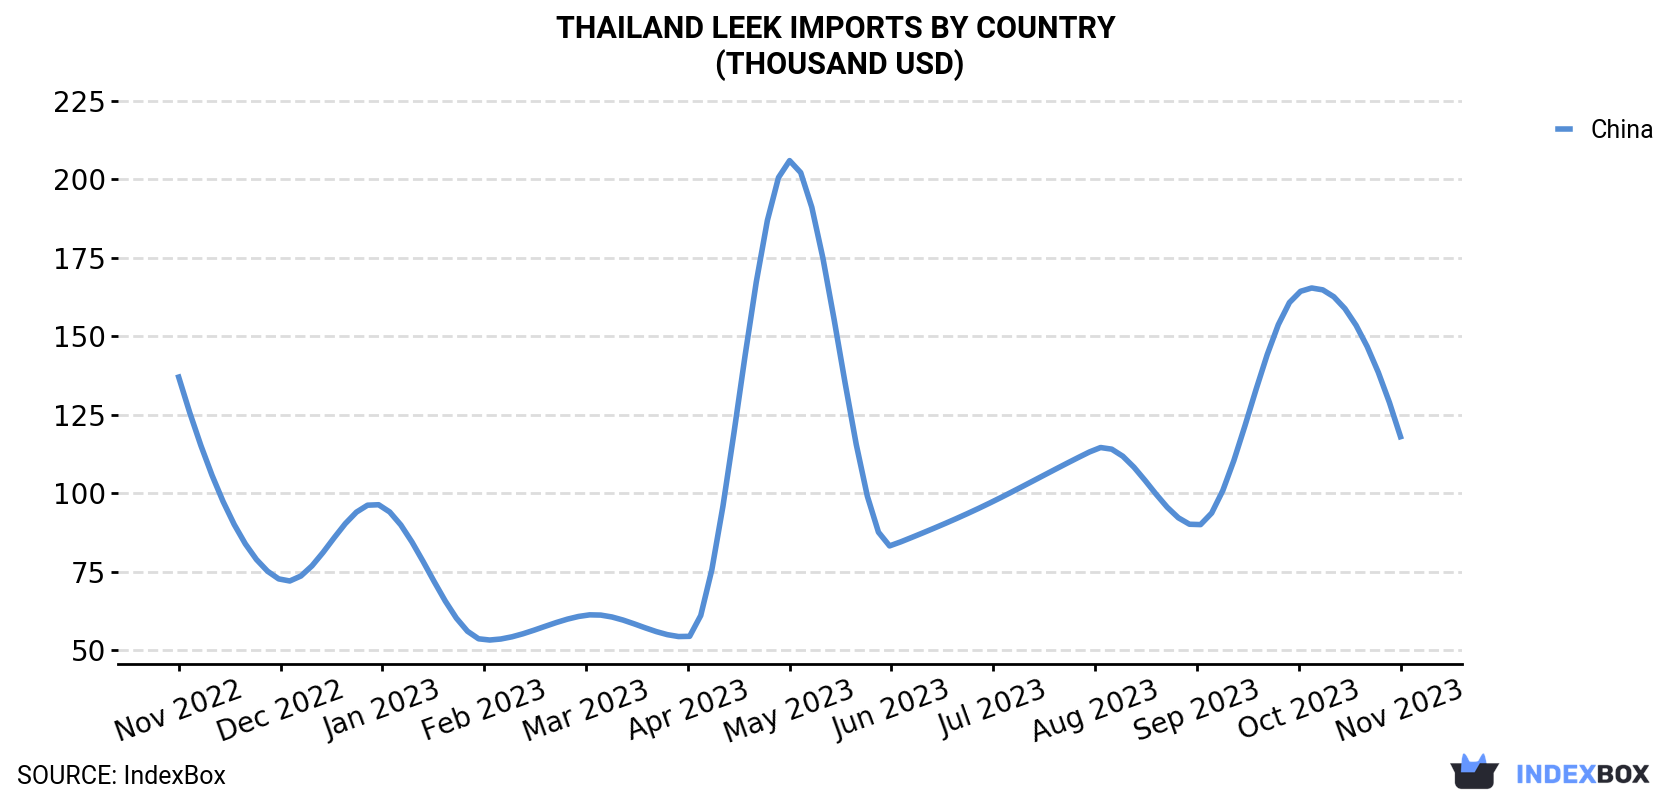 Thailand Leek Imports By Country (Thousand USD)